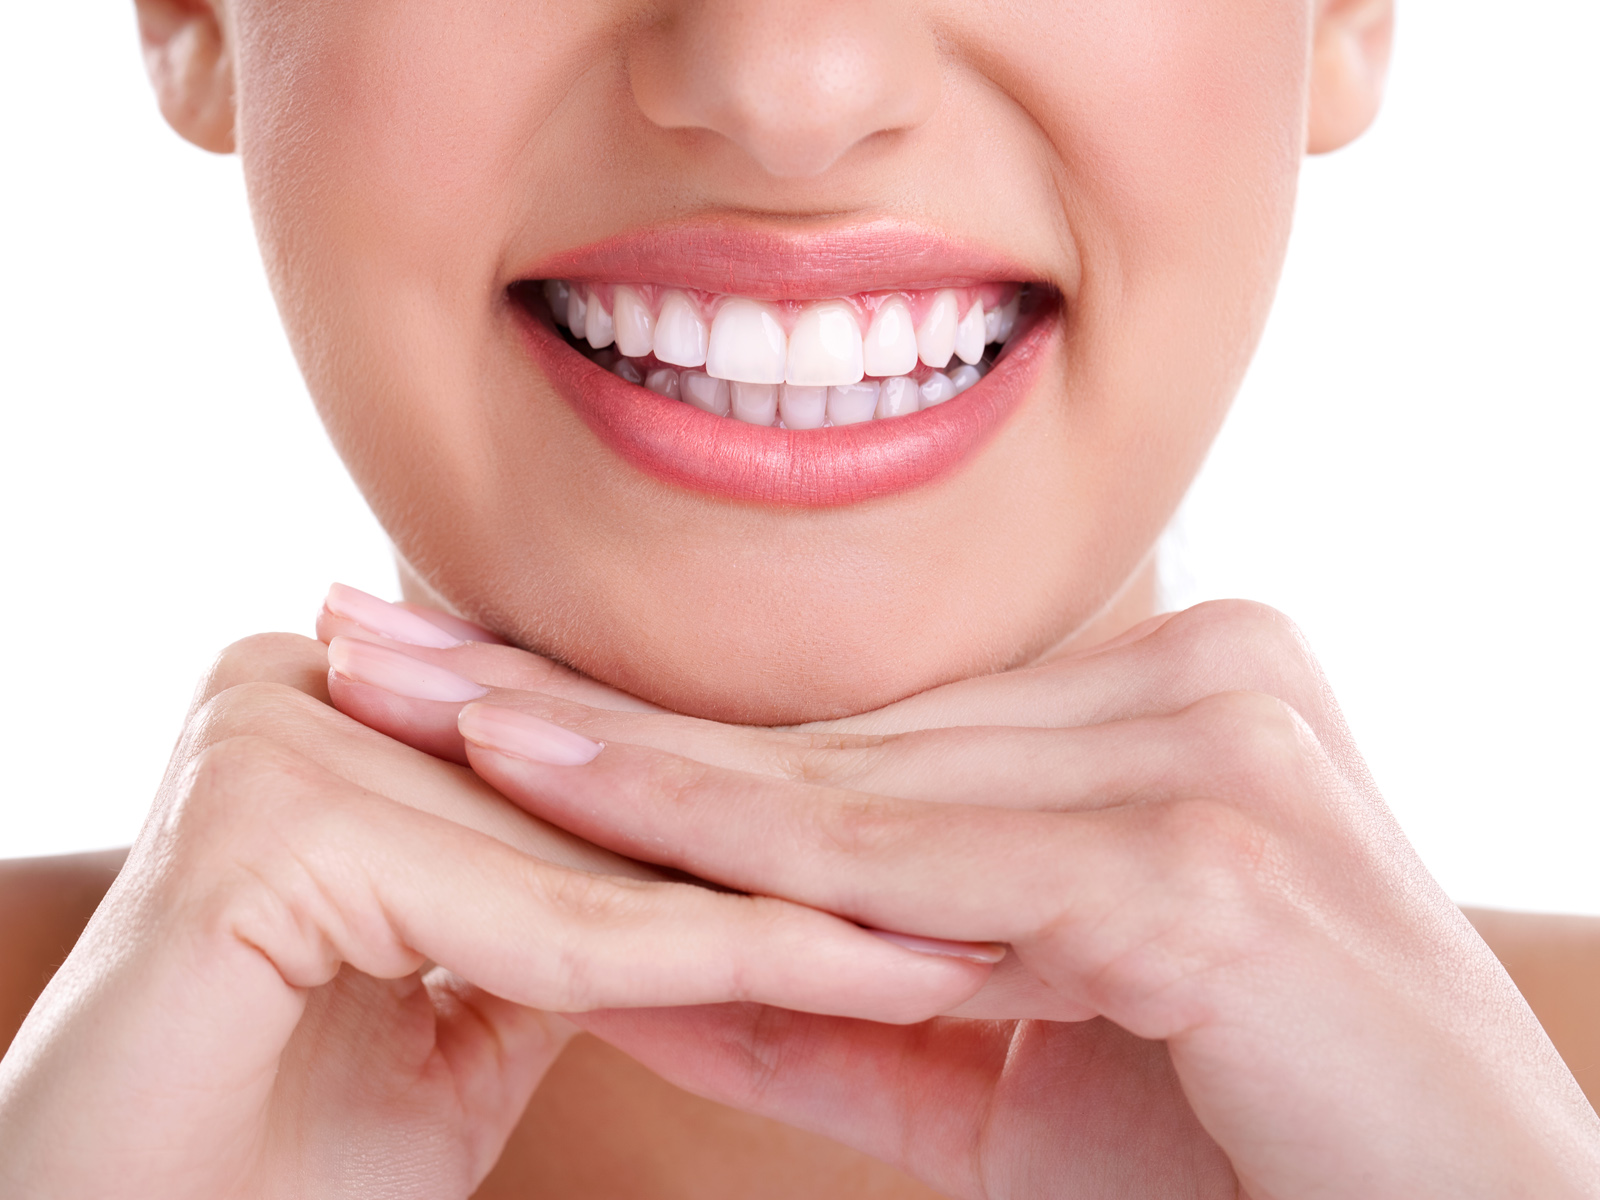 What Do Your Teeth Say About Your Health